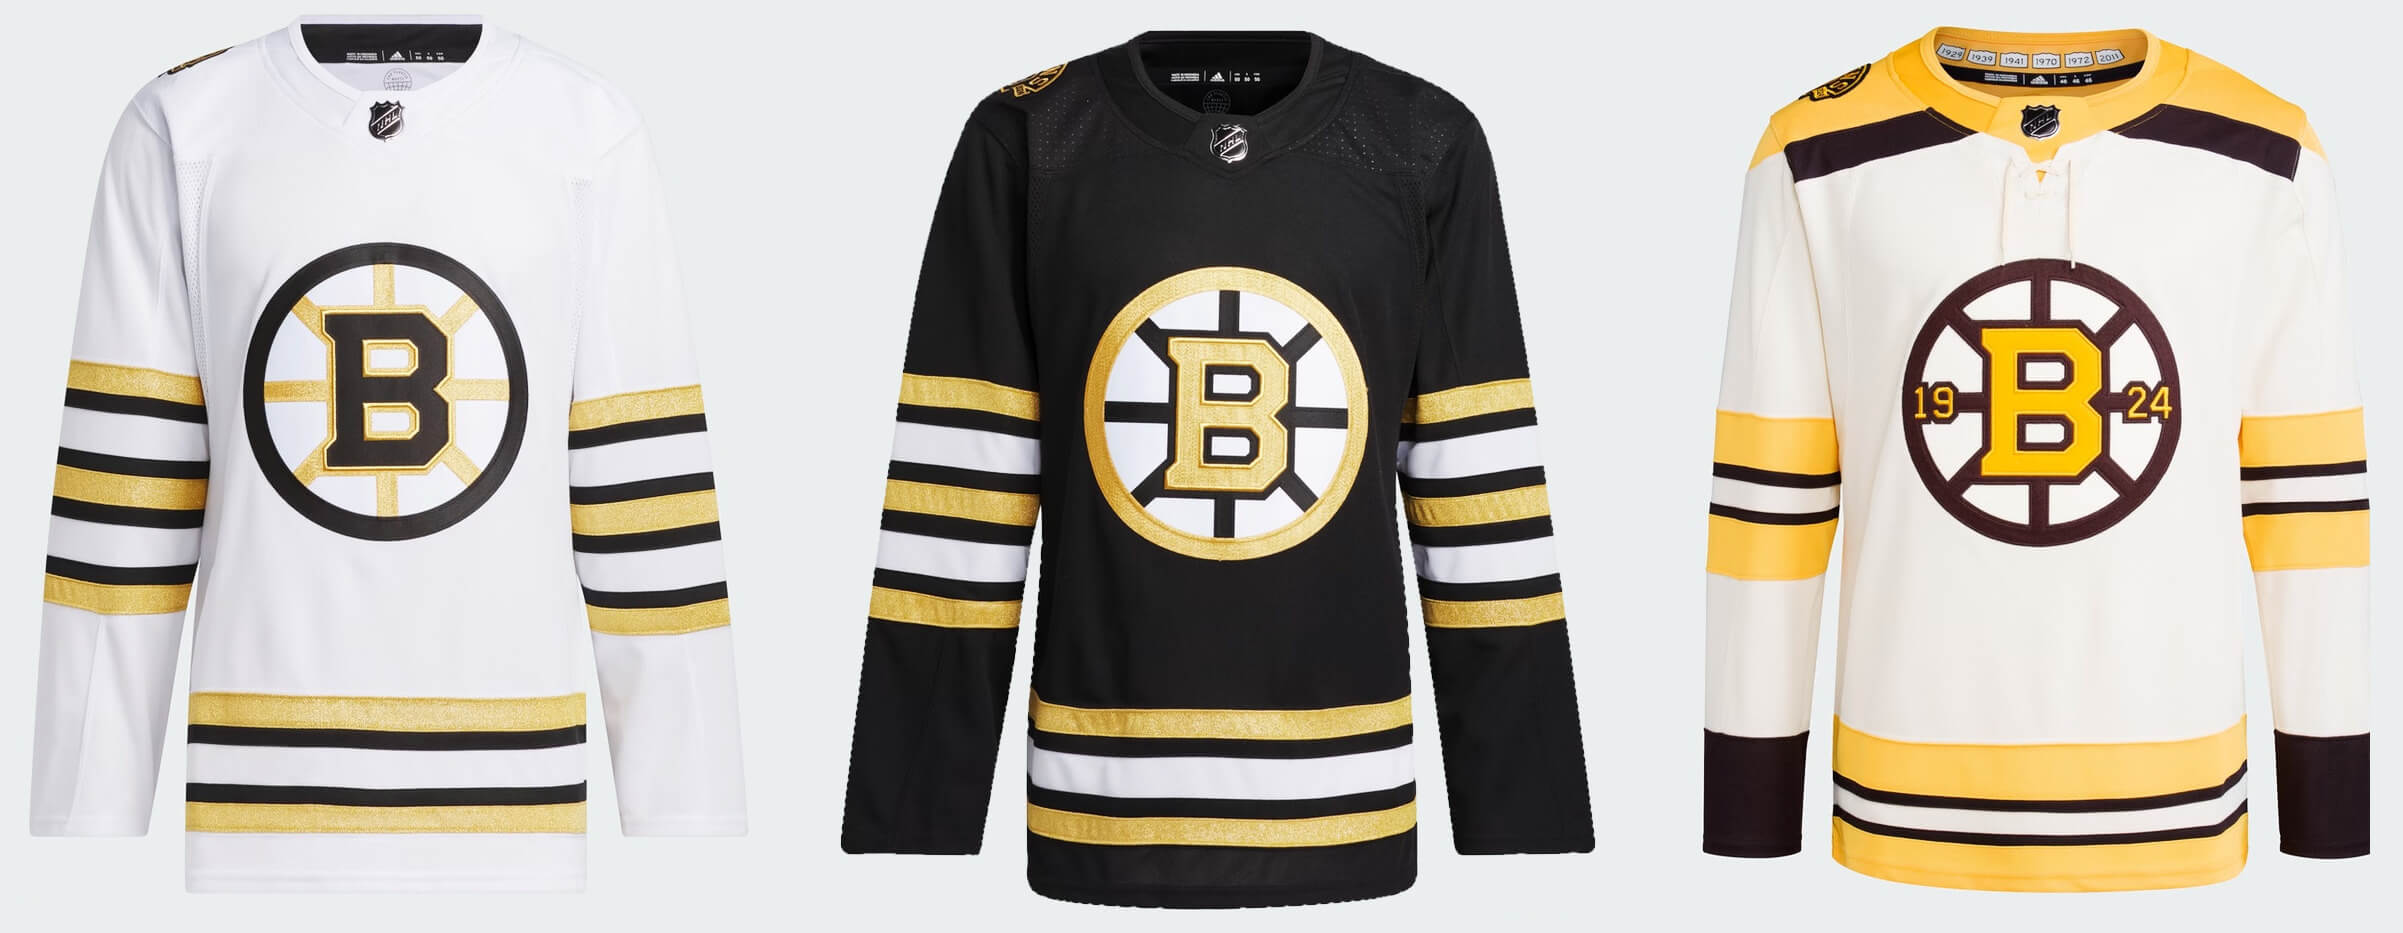 boston bruins jerseys over the years